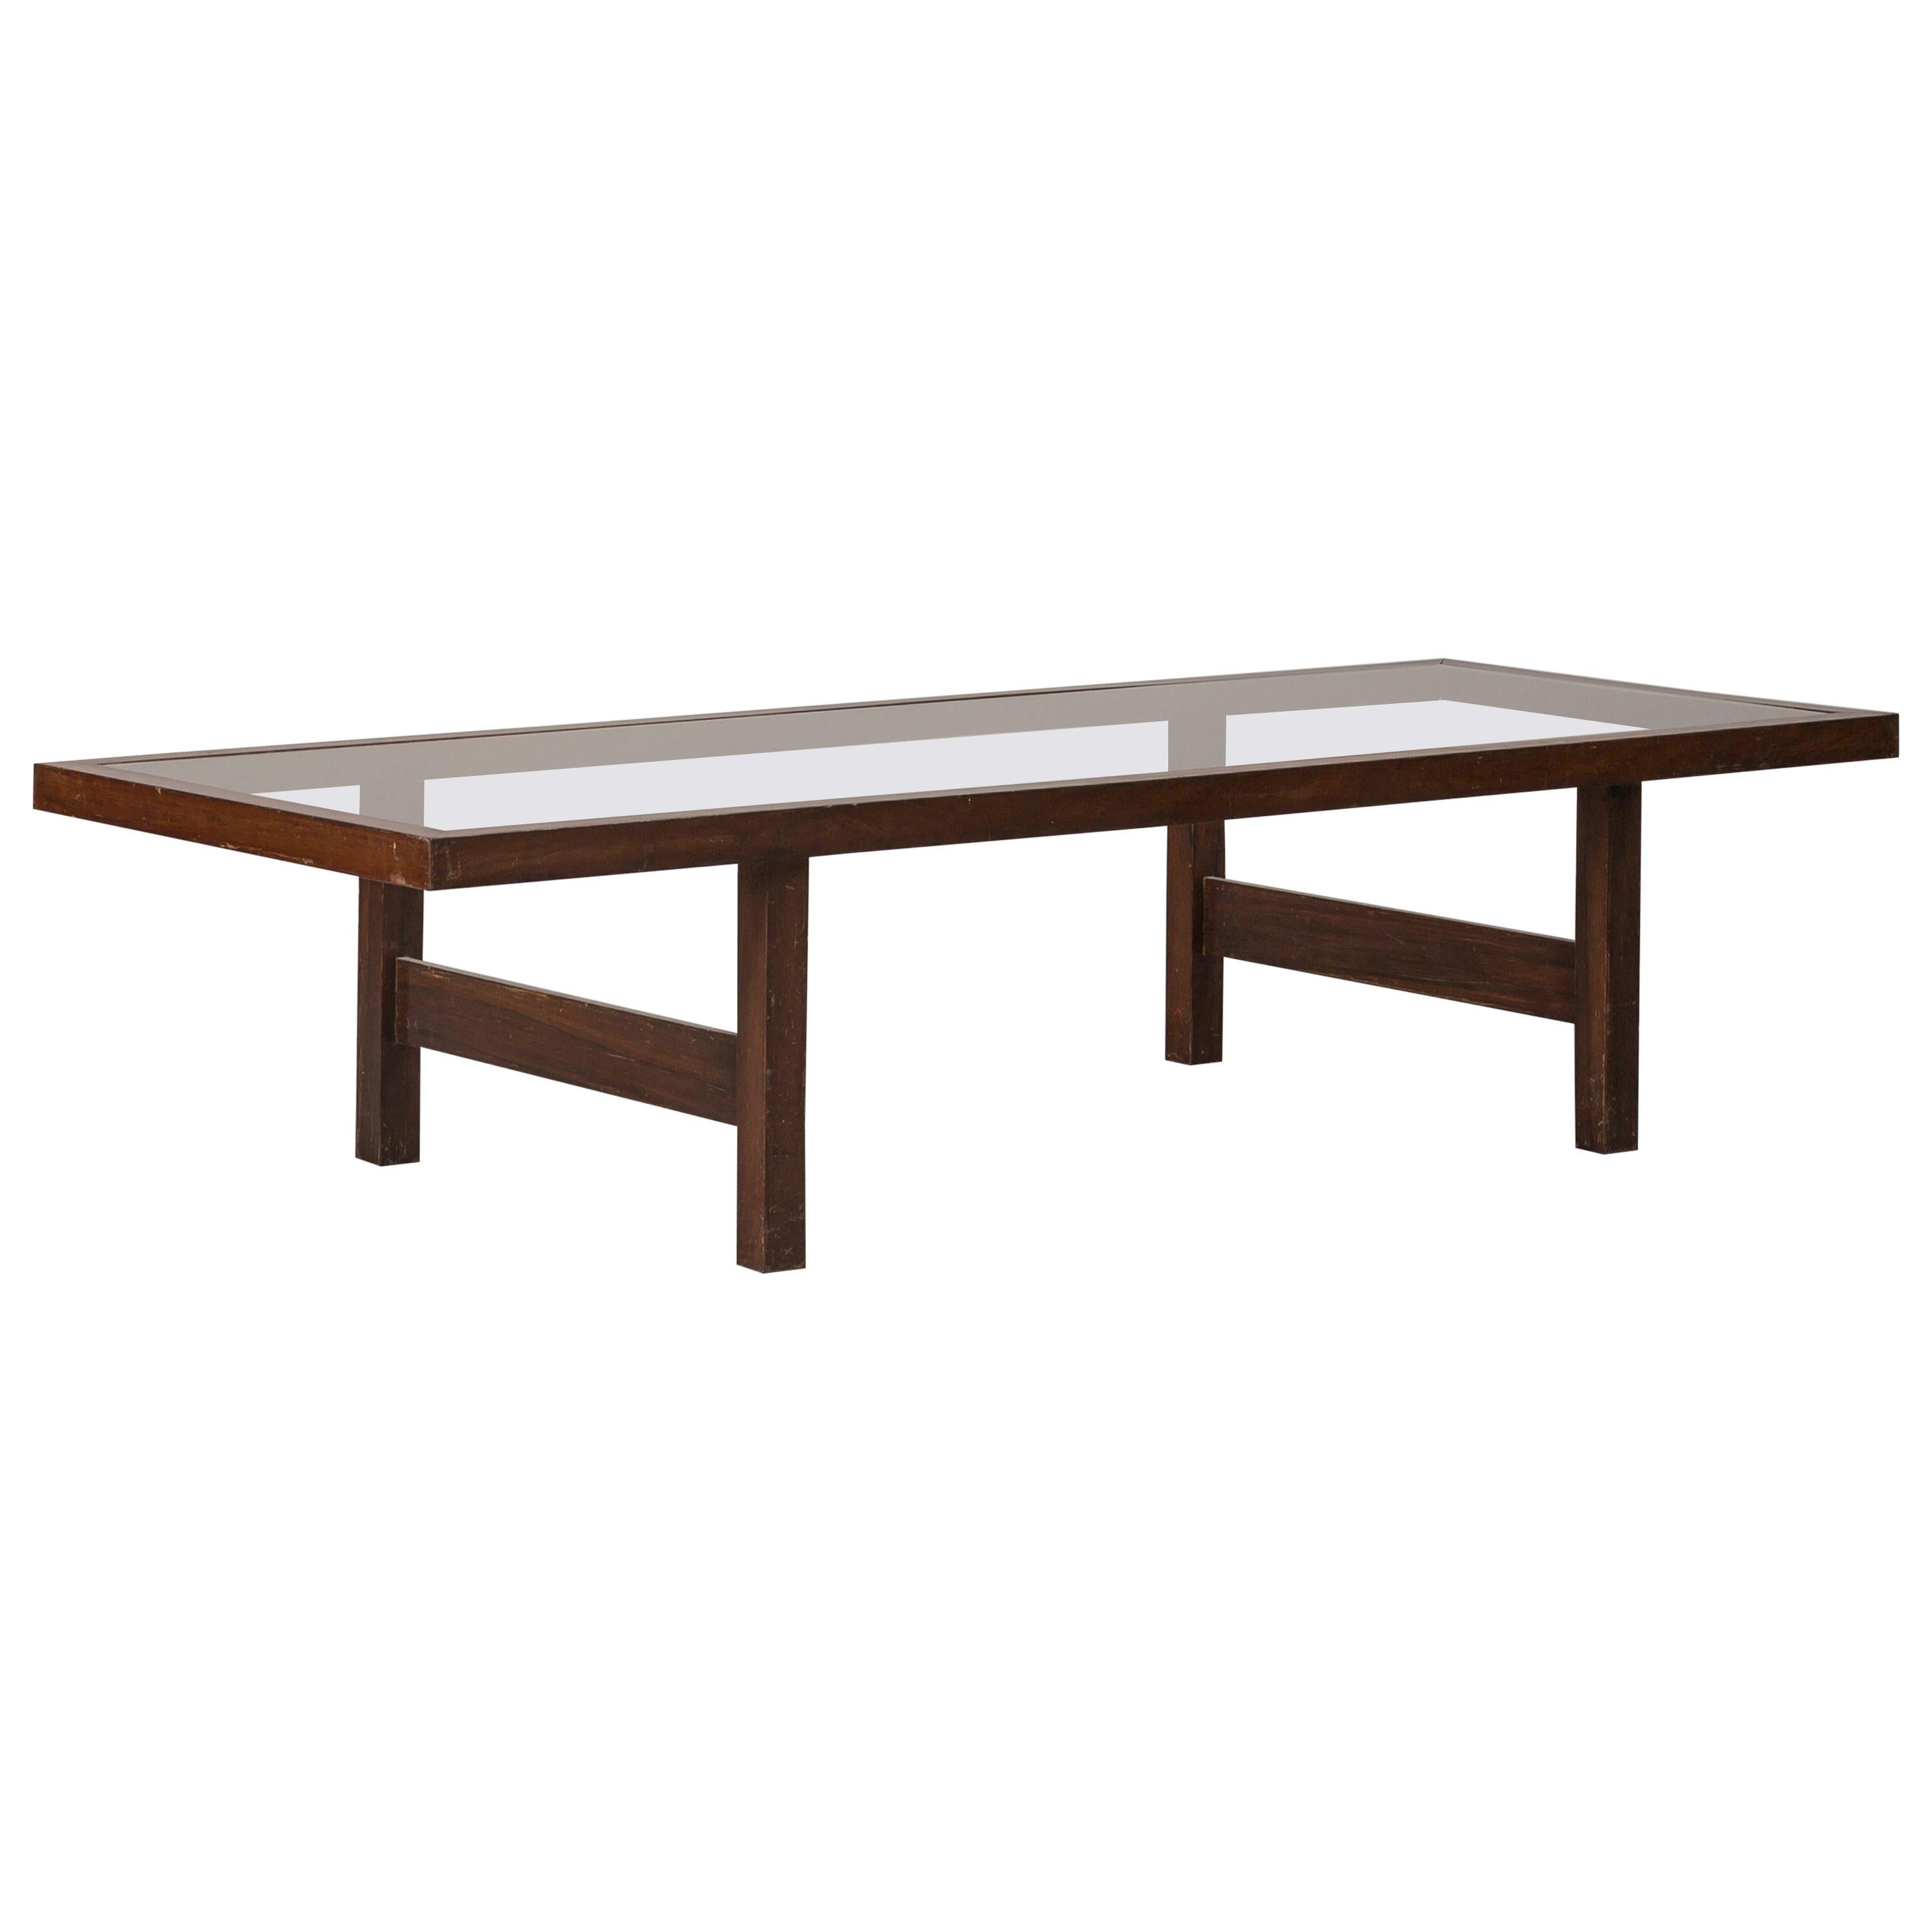 Low table by Branco & Preto For Sale